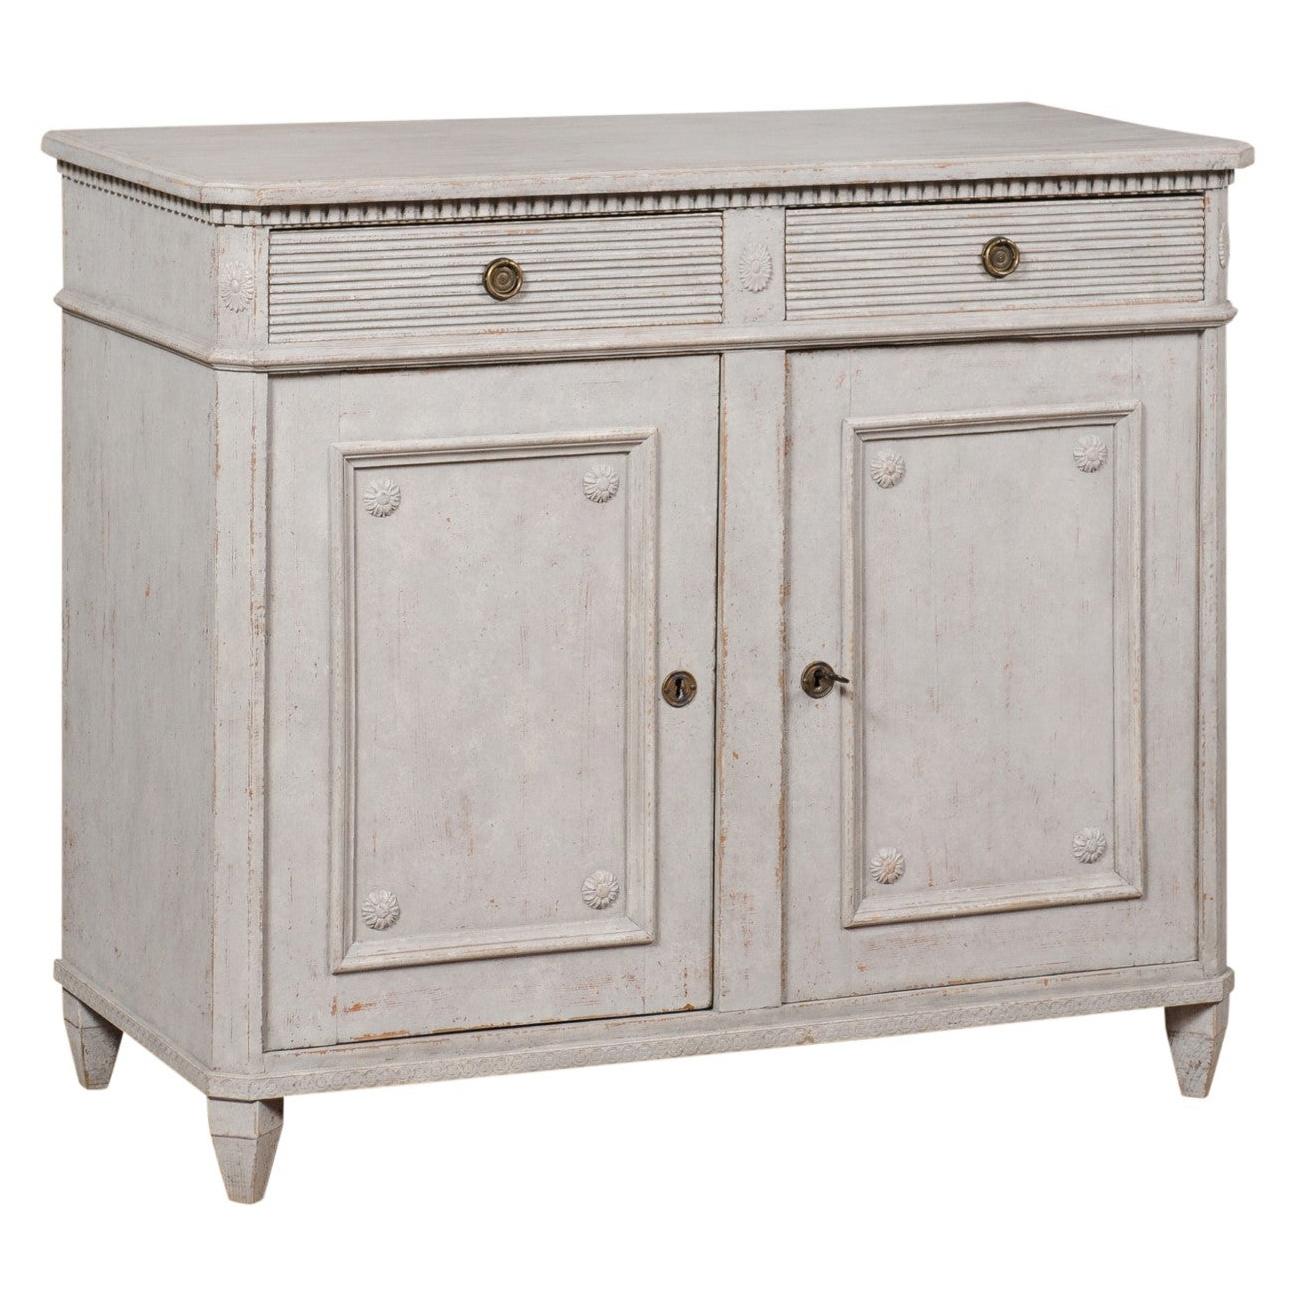 Swedish 1880s Gustavian Style Painted Sideboard with Two Drawers over Two Doors